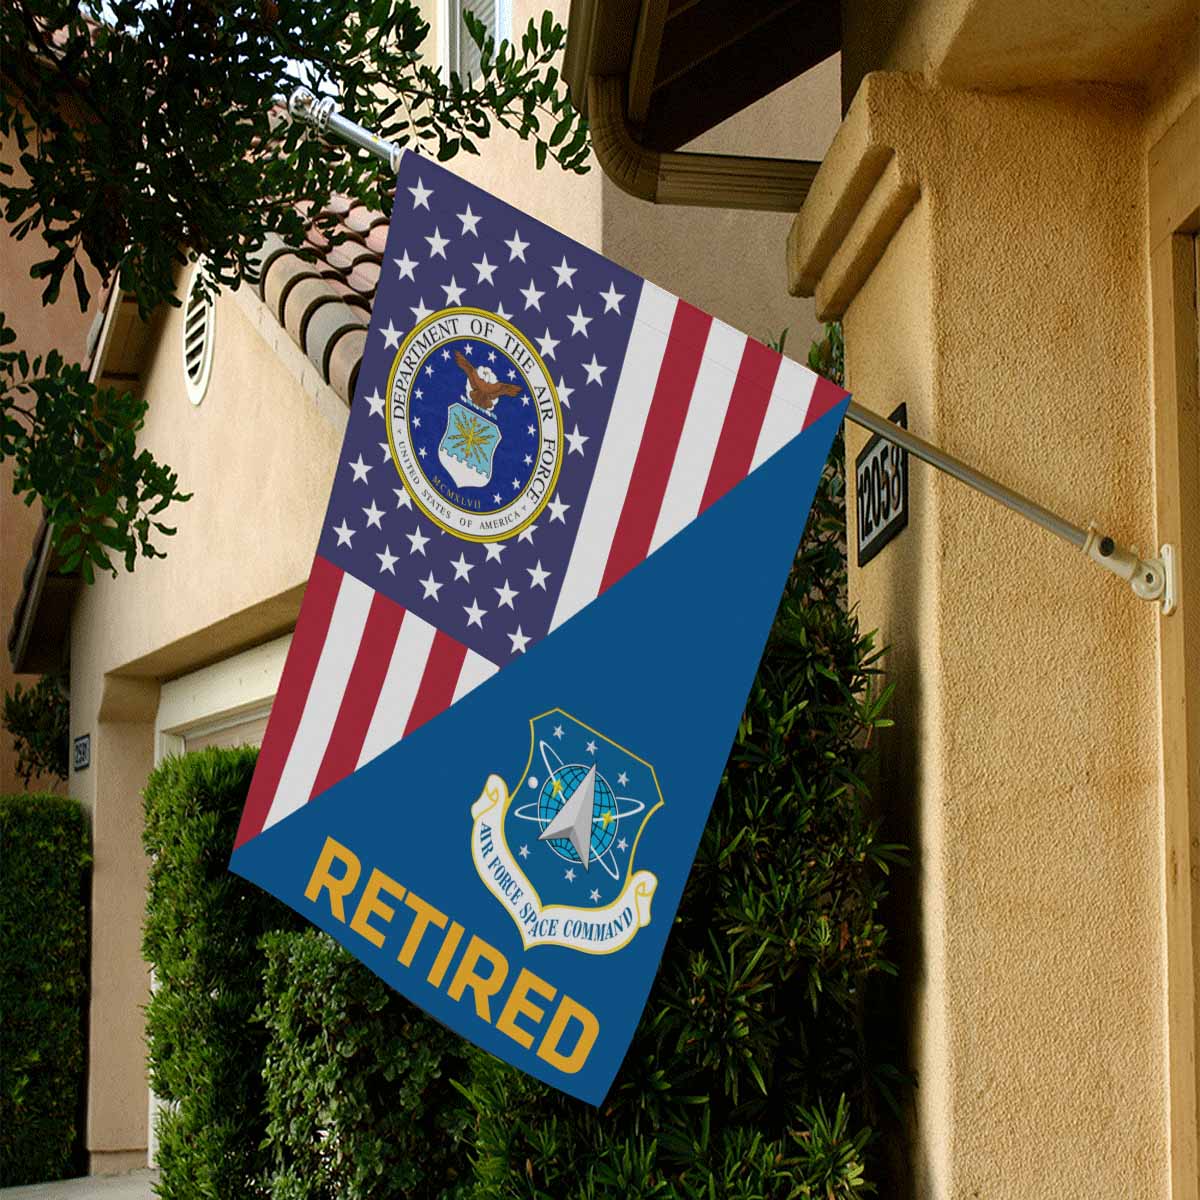 US Air Force Space Command Retired House Flag 28 inches x 40 inches Twin-Side Printing-HouseFlag-USAF-Shield-Veterans Nation